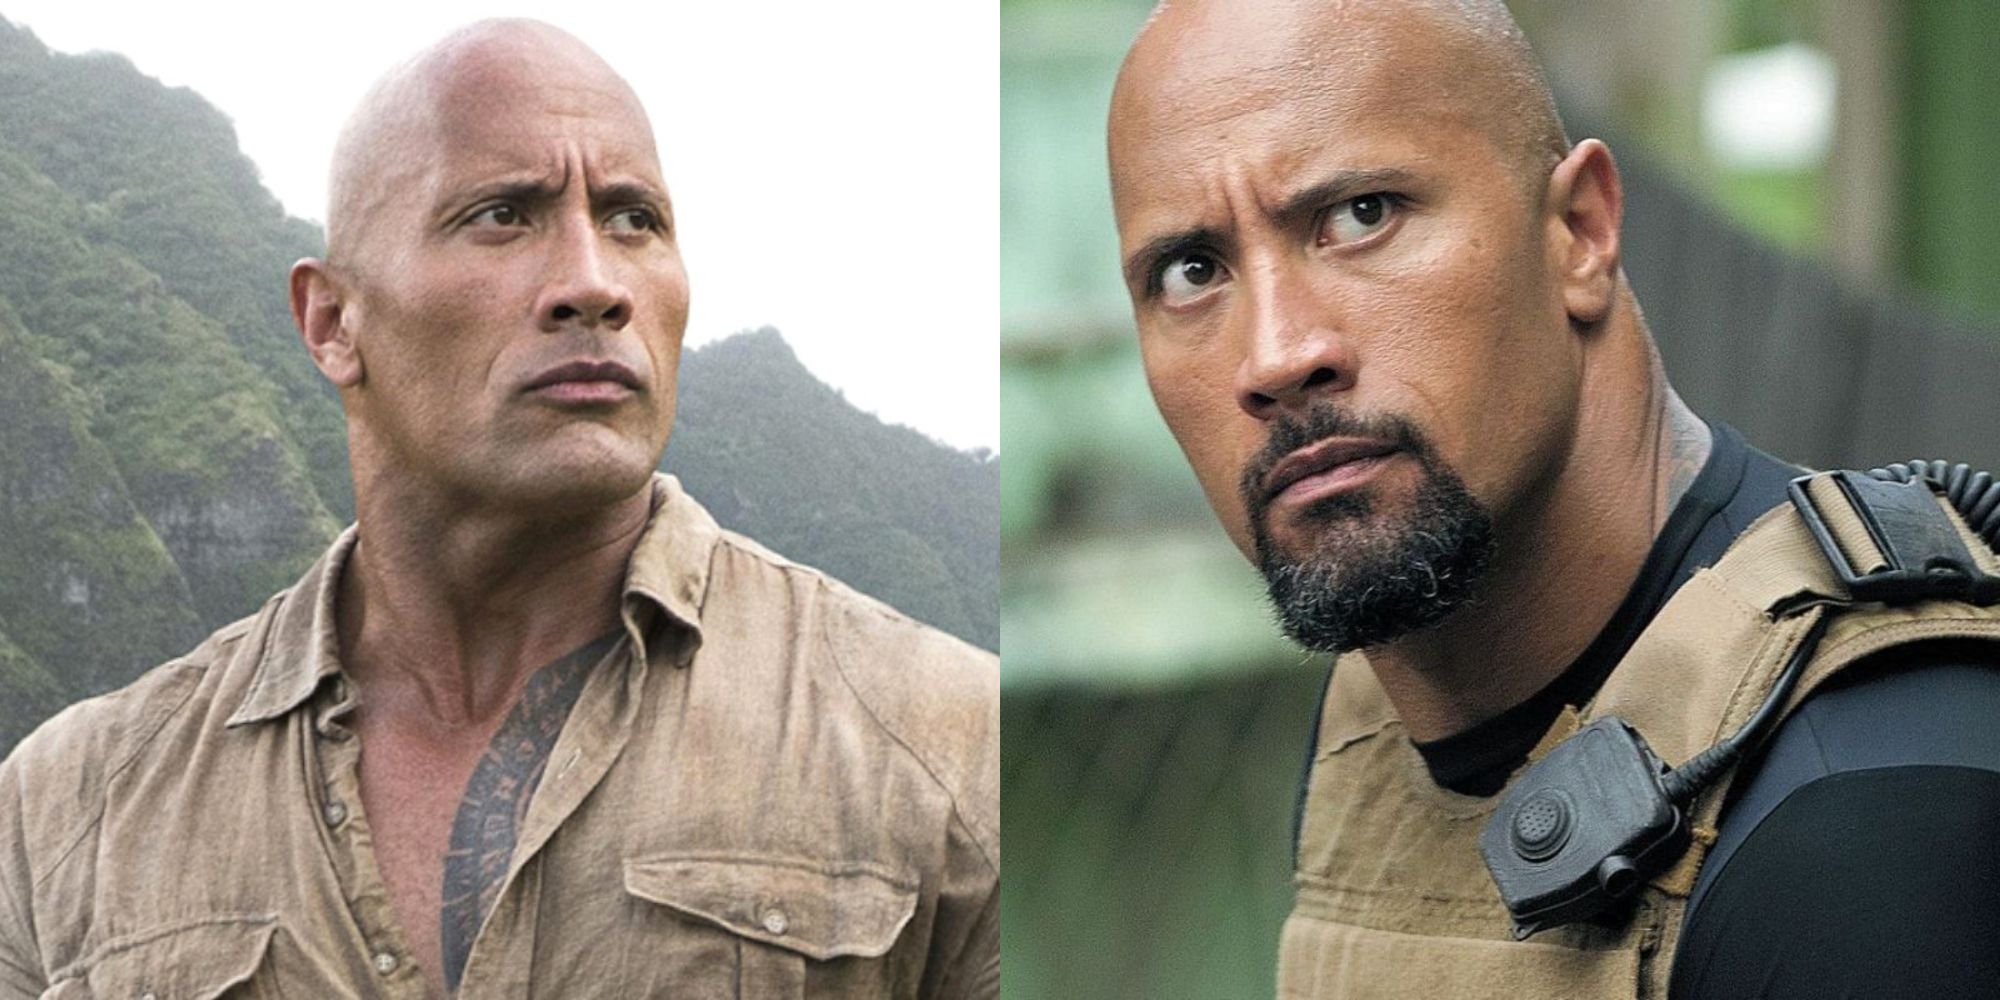 Dwayne Johnson in Jumanji and Fast and Furious